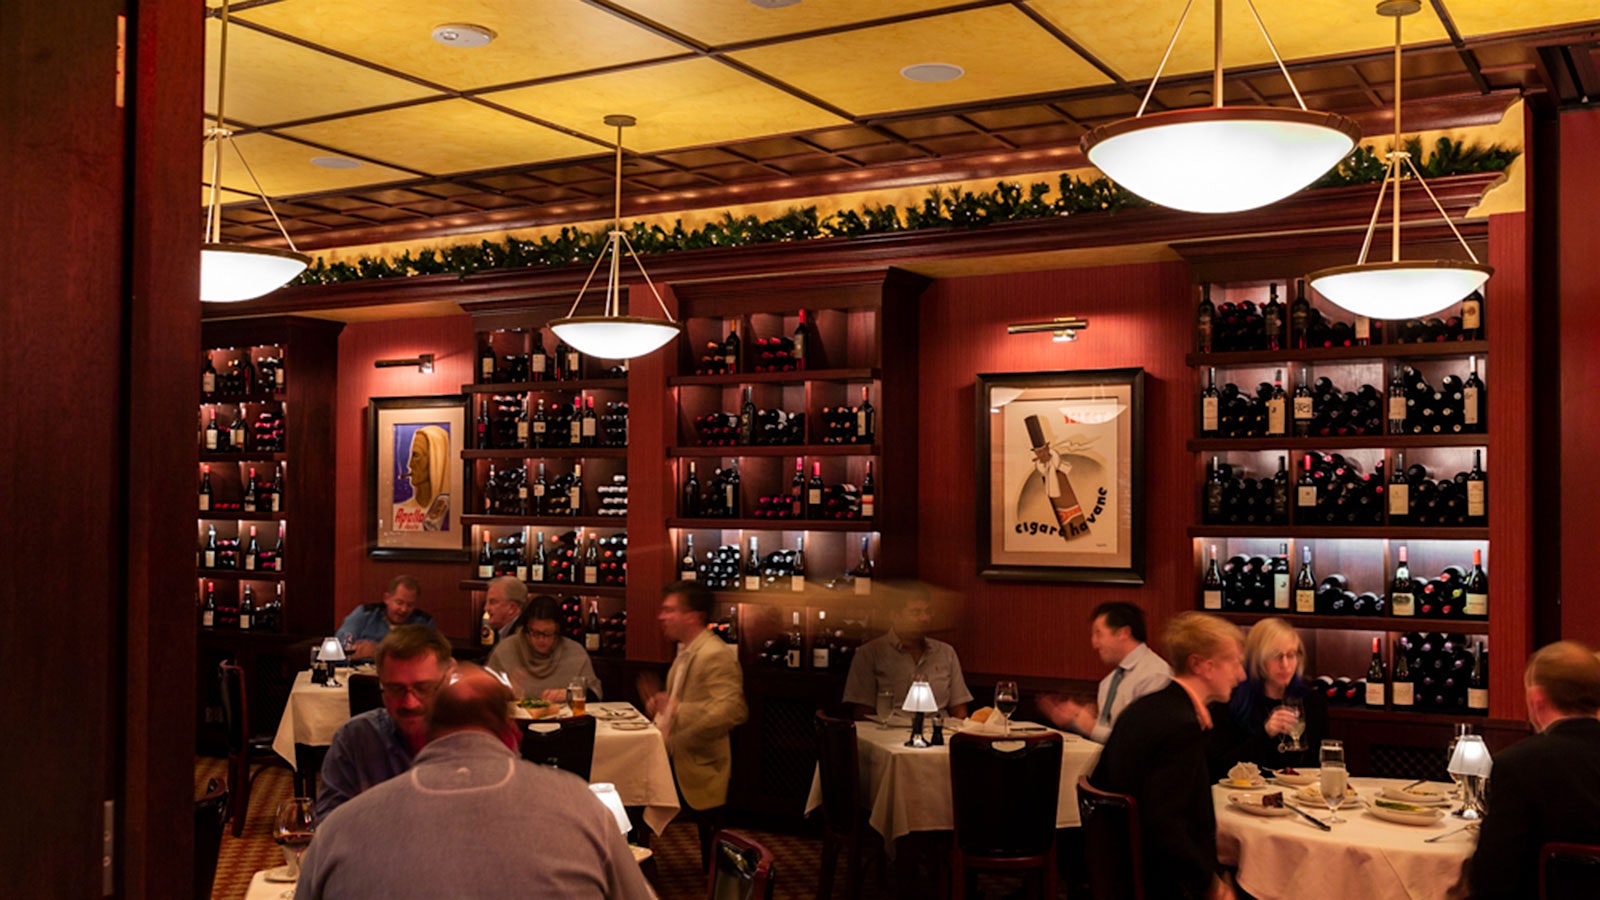  People dining at the dining room at Pappas Bros’ Steakhouse in Houston, with red walls and bottles of wine on shelves, and a gold-colored ceiling